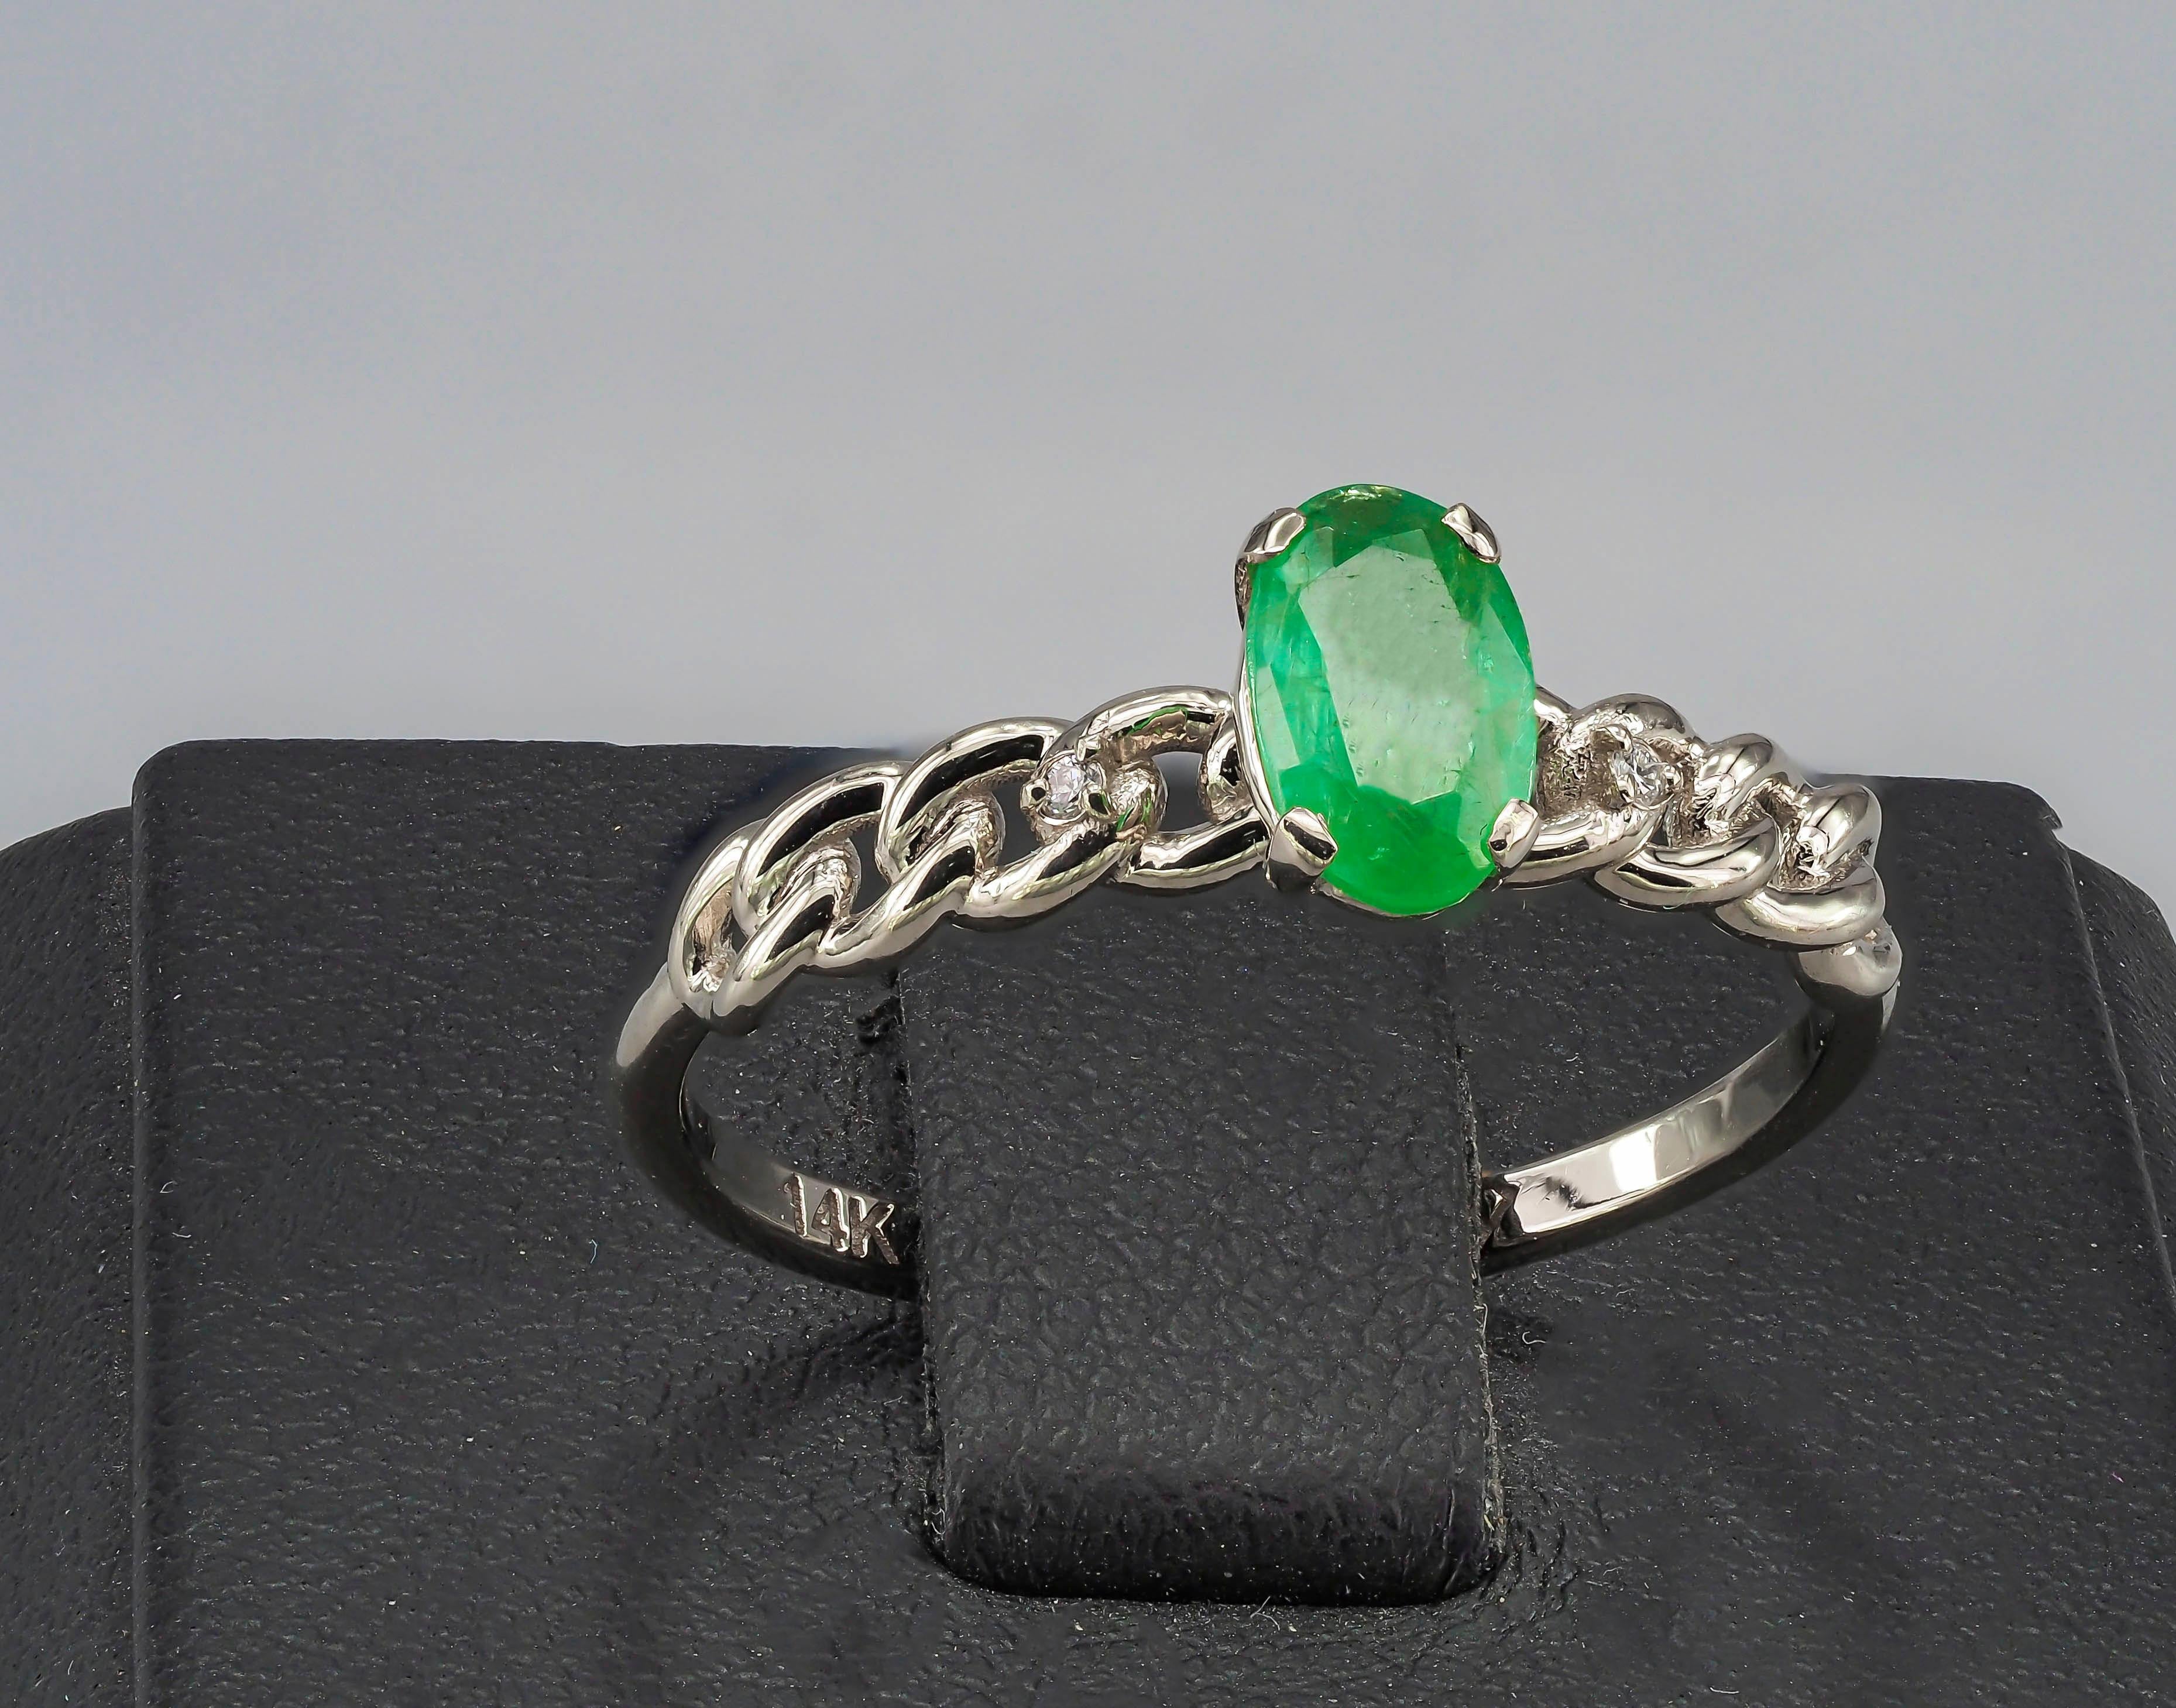 For Sale:  Emerald and diamonds 14k gold ring. Oval emerald gold ring. 6